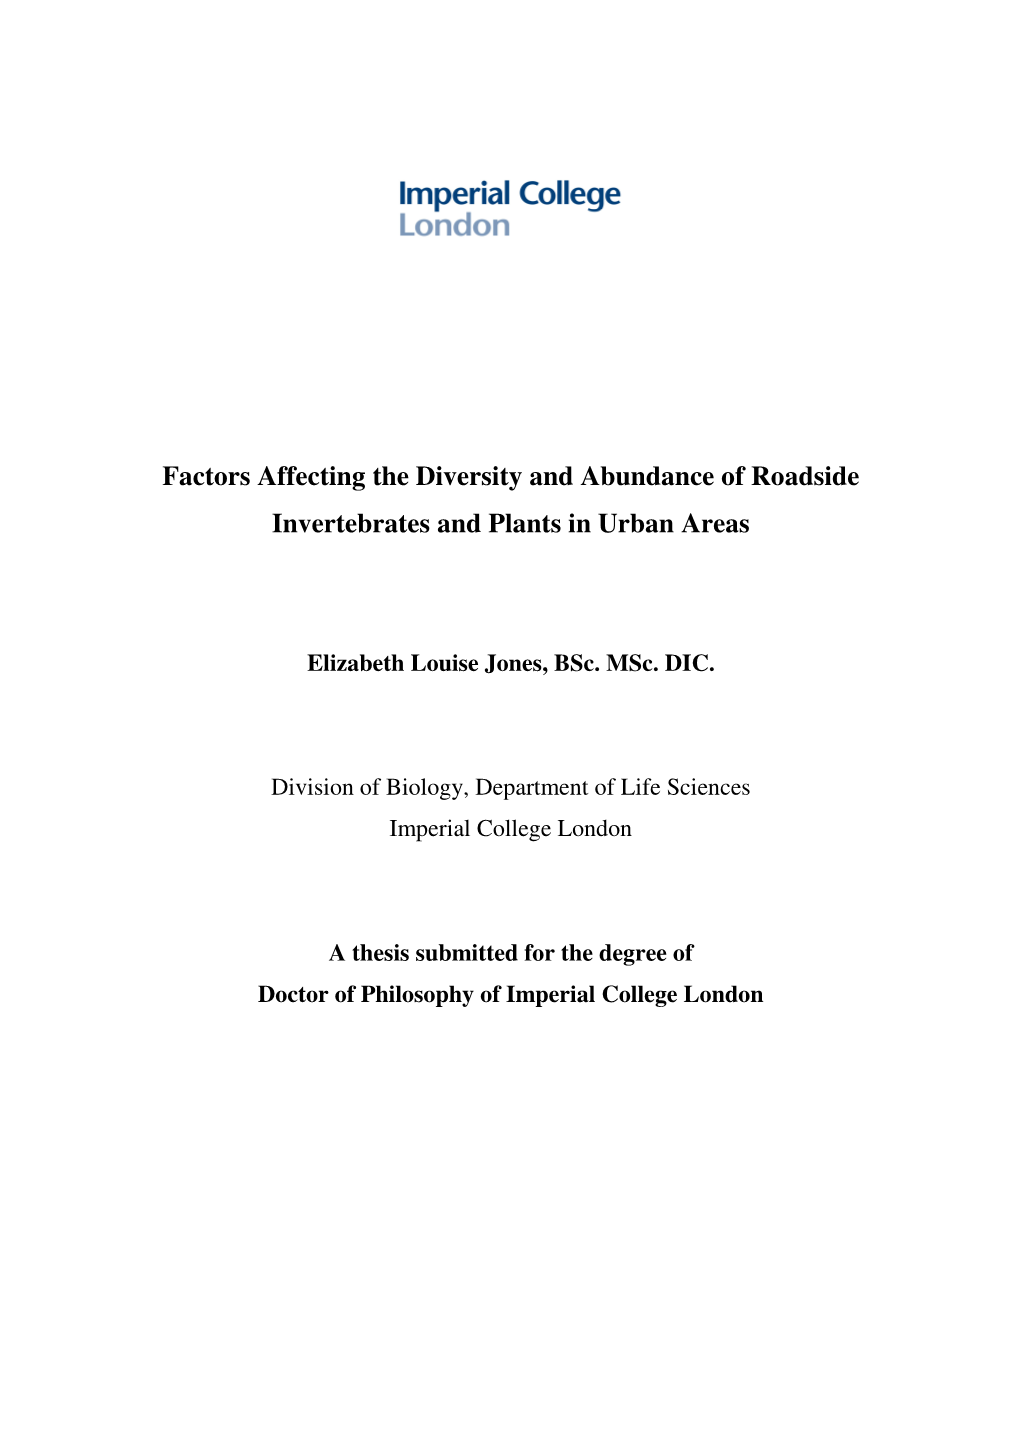 Factors Affecting the Diversity and Abundance of Roadside Invertebrates and Plants in Urban Areas